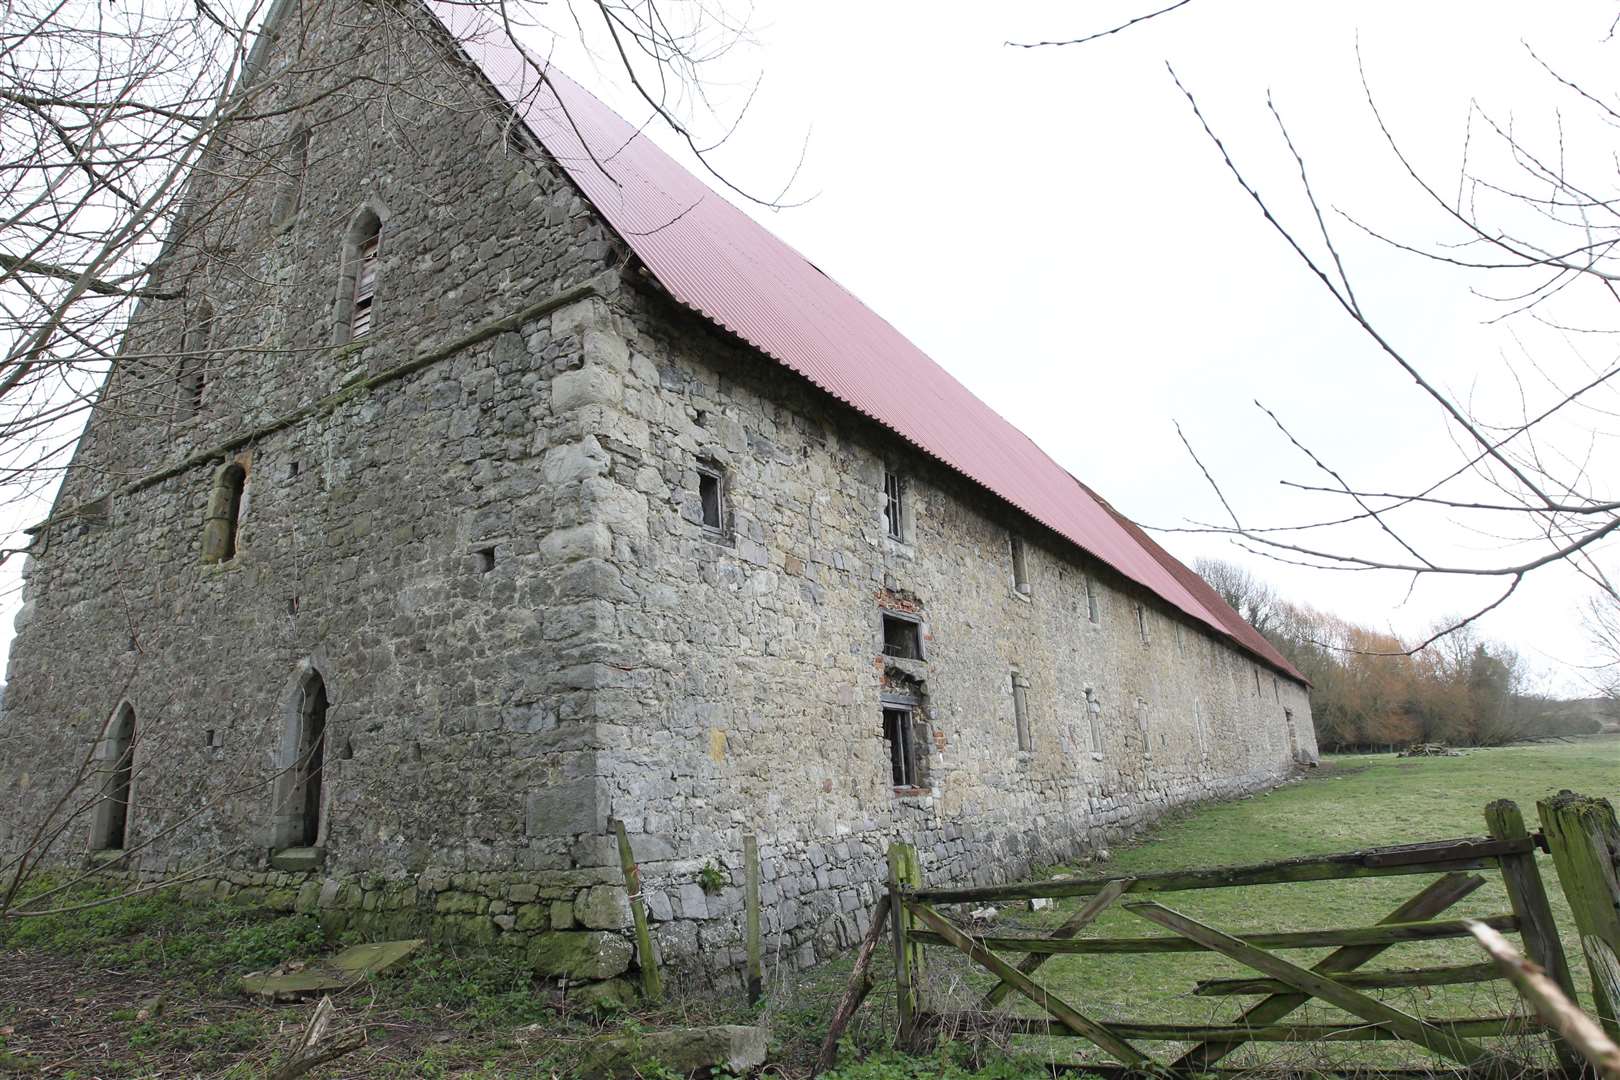 The barn at Boxley Abbey was possibly once the abbey's hospitium to house visiting pilgrims